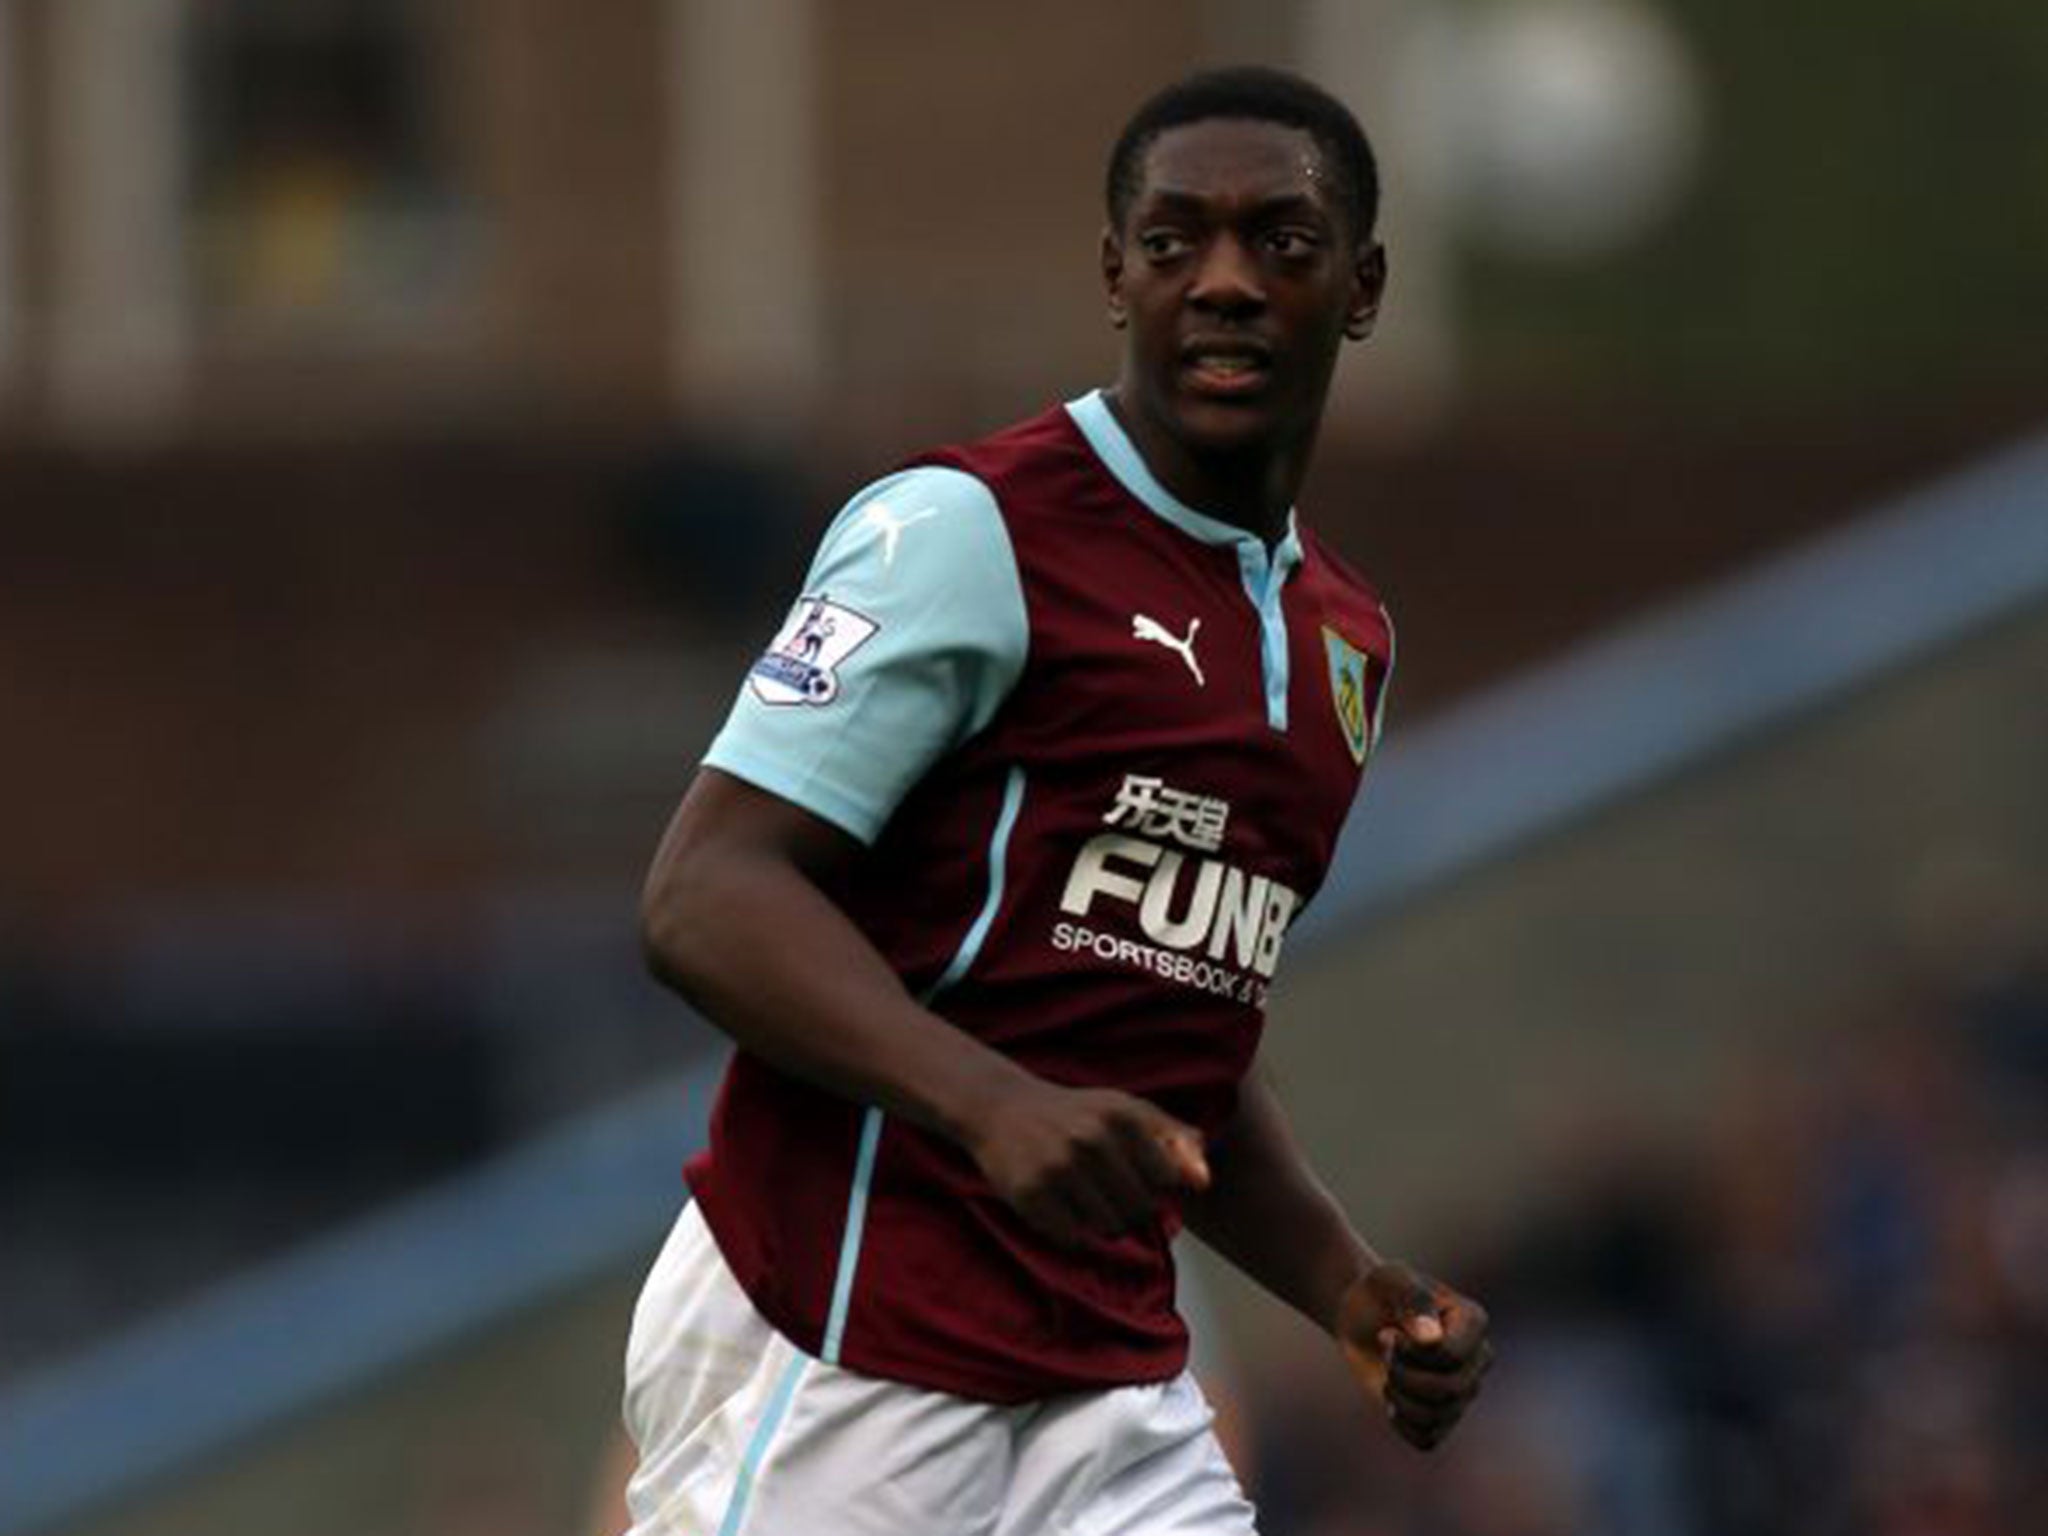 Sordell's Burnley have scored just once this season